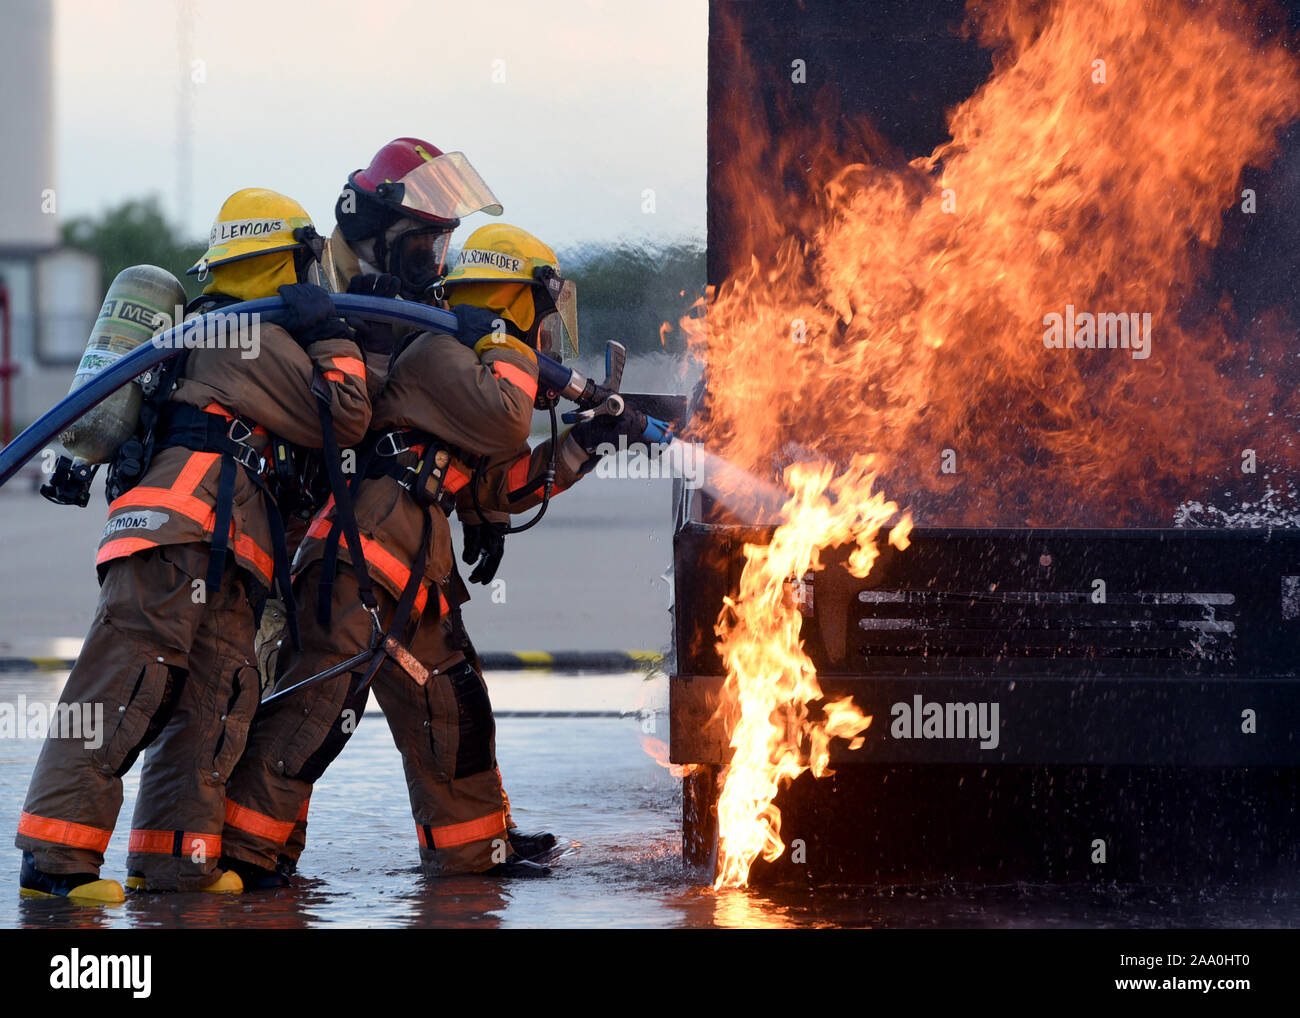 U.S. Air Force Airman Kristina Schneinder, 312th Training Squadron student, leads Airman Emalie Lemons, 312th TRS student, in a textbook style approach to a mock vehicle fire outside the Louis F. Garland Department of Defense Fire Academy on Goodfellow Air Force Base, Texas, July 11, 2019.  Schneinder and Lemons were trained in the classroom how to approach a live fire and what angle to spray the water hose for hood and undercarriage fires before their hands on experience. Stock Photo